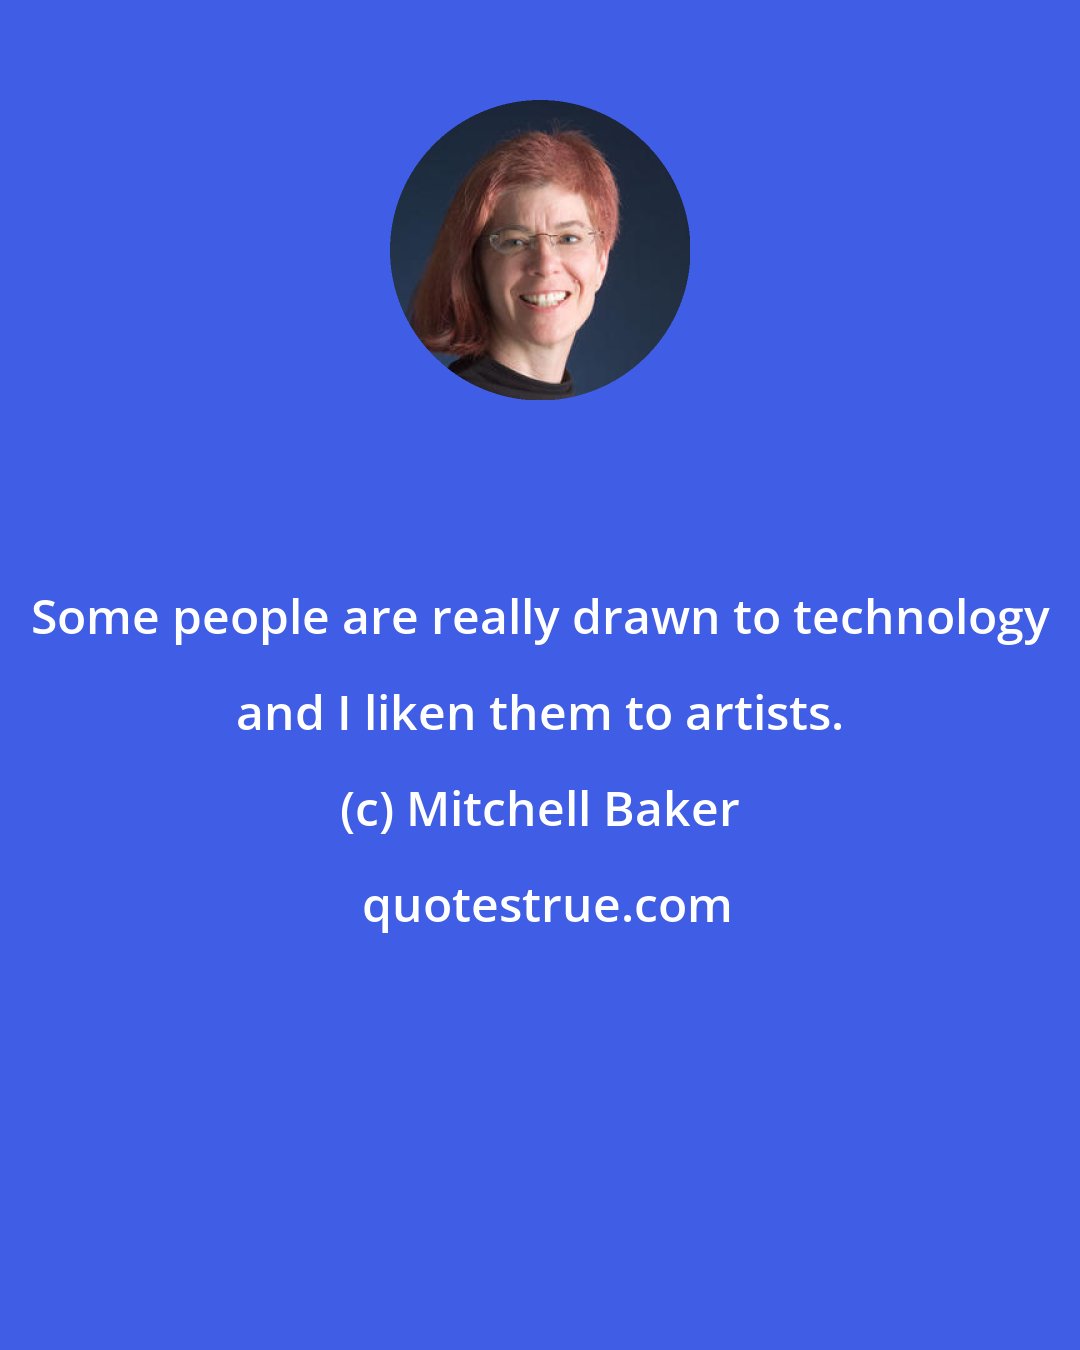 Mitchell Baker: Some people are really drawn to technology and I liken them to artists.